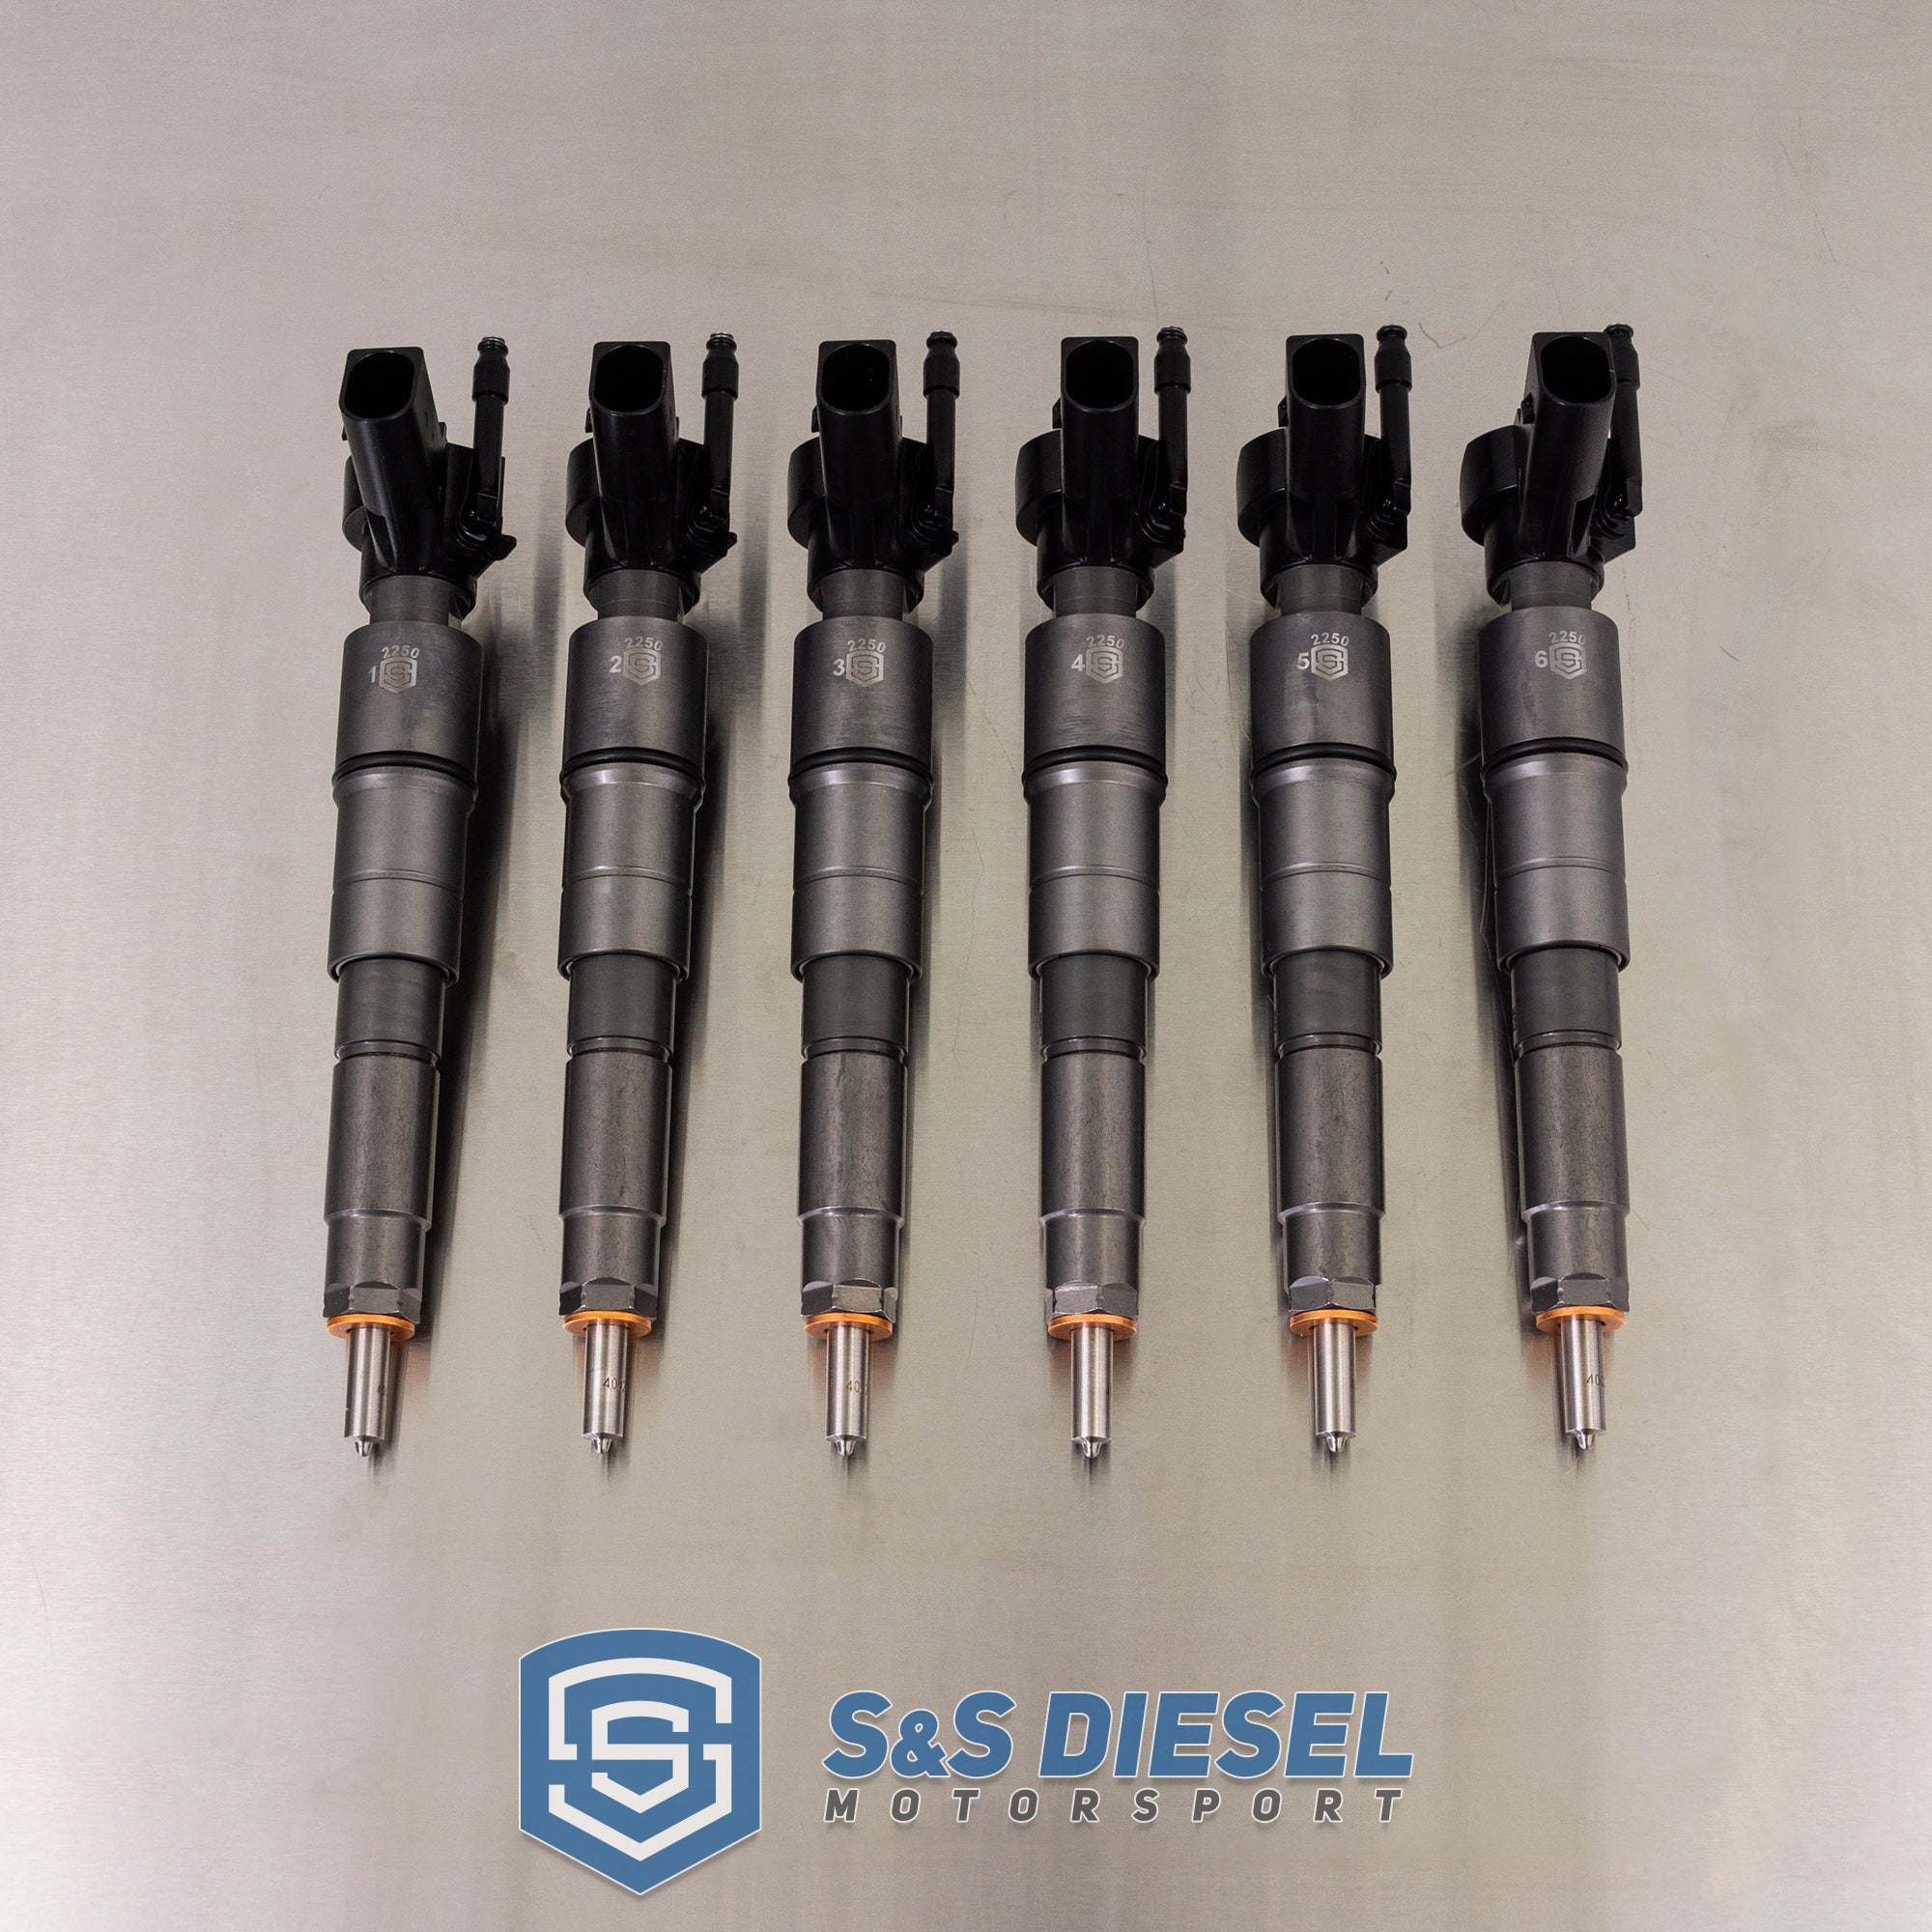 S&S Diesel - BMW M57 Piezo Injector Modifications (100% over